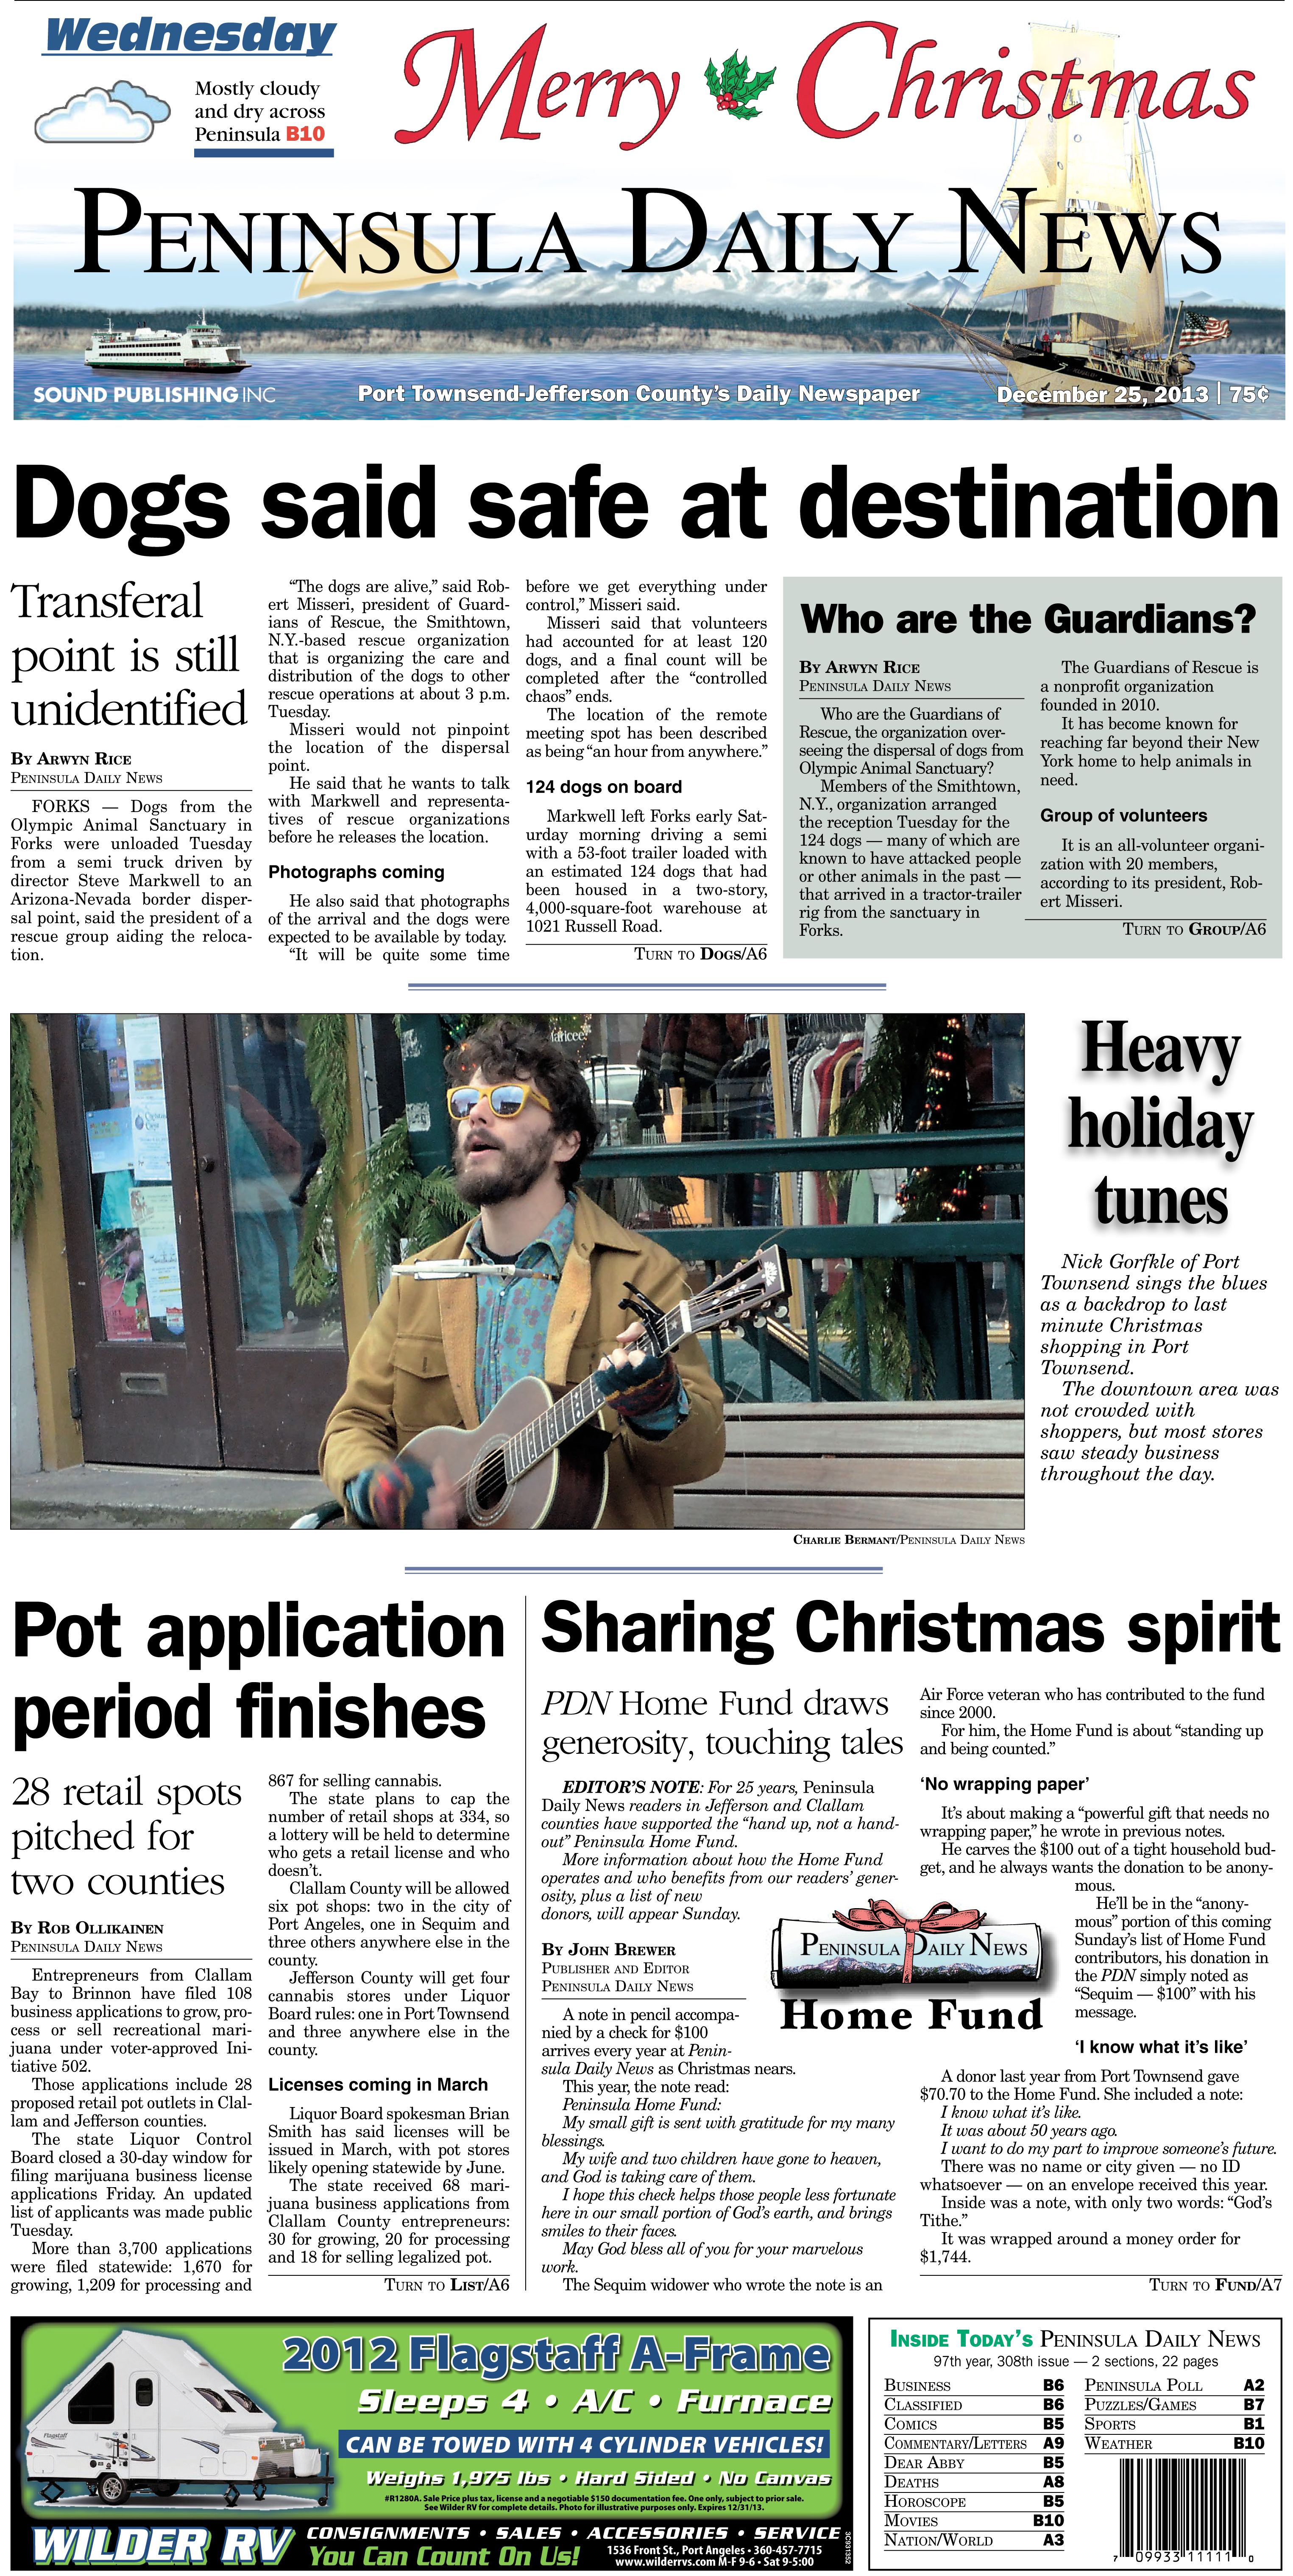 PDN's front page for today's Port Townsend/Jefferson County edition.